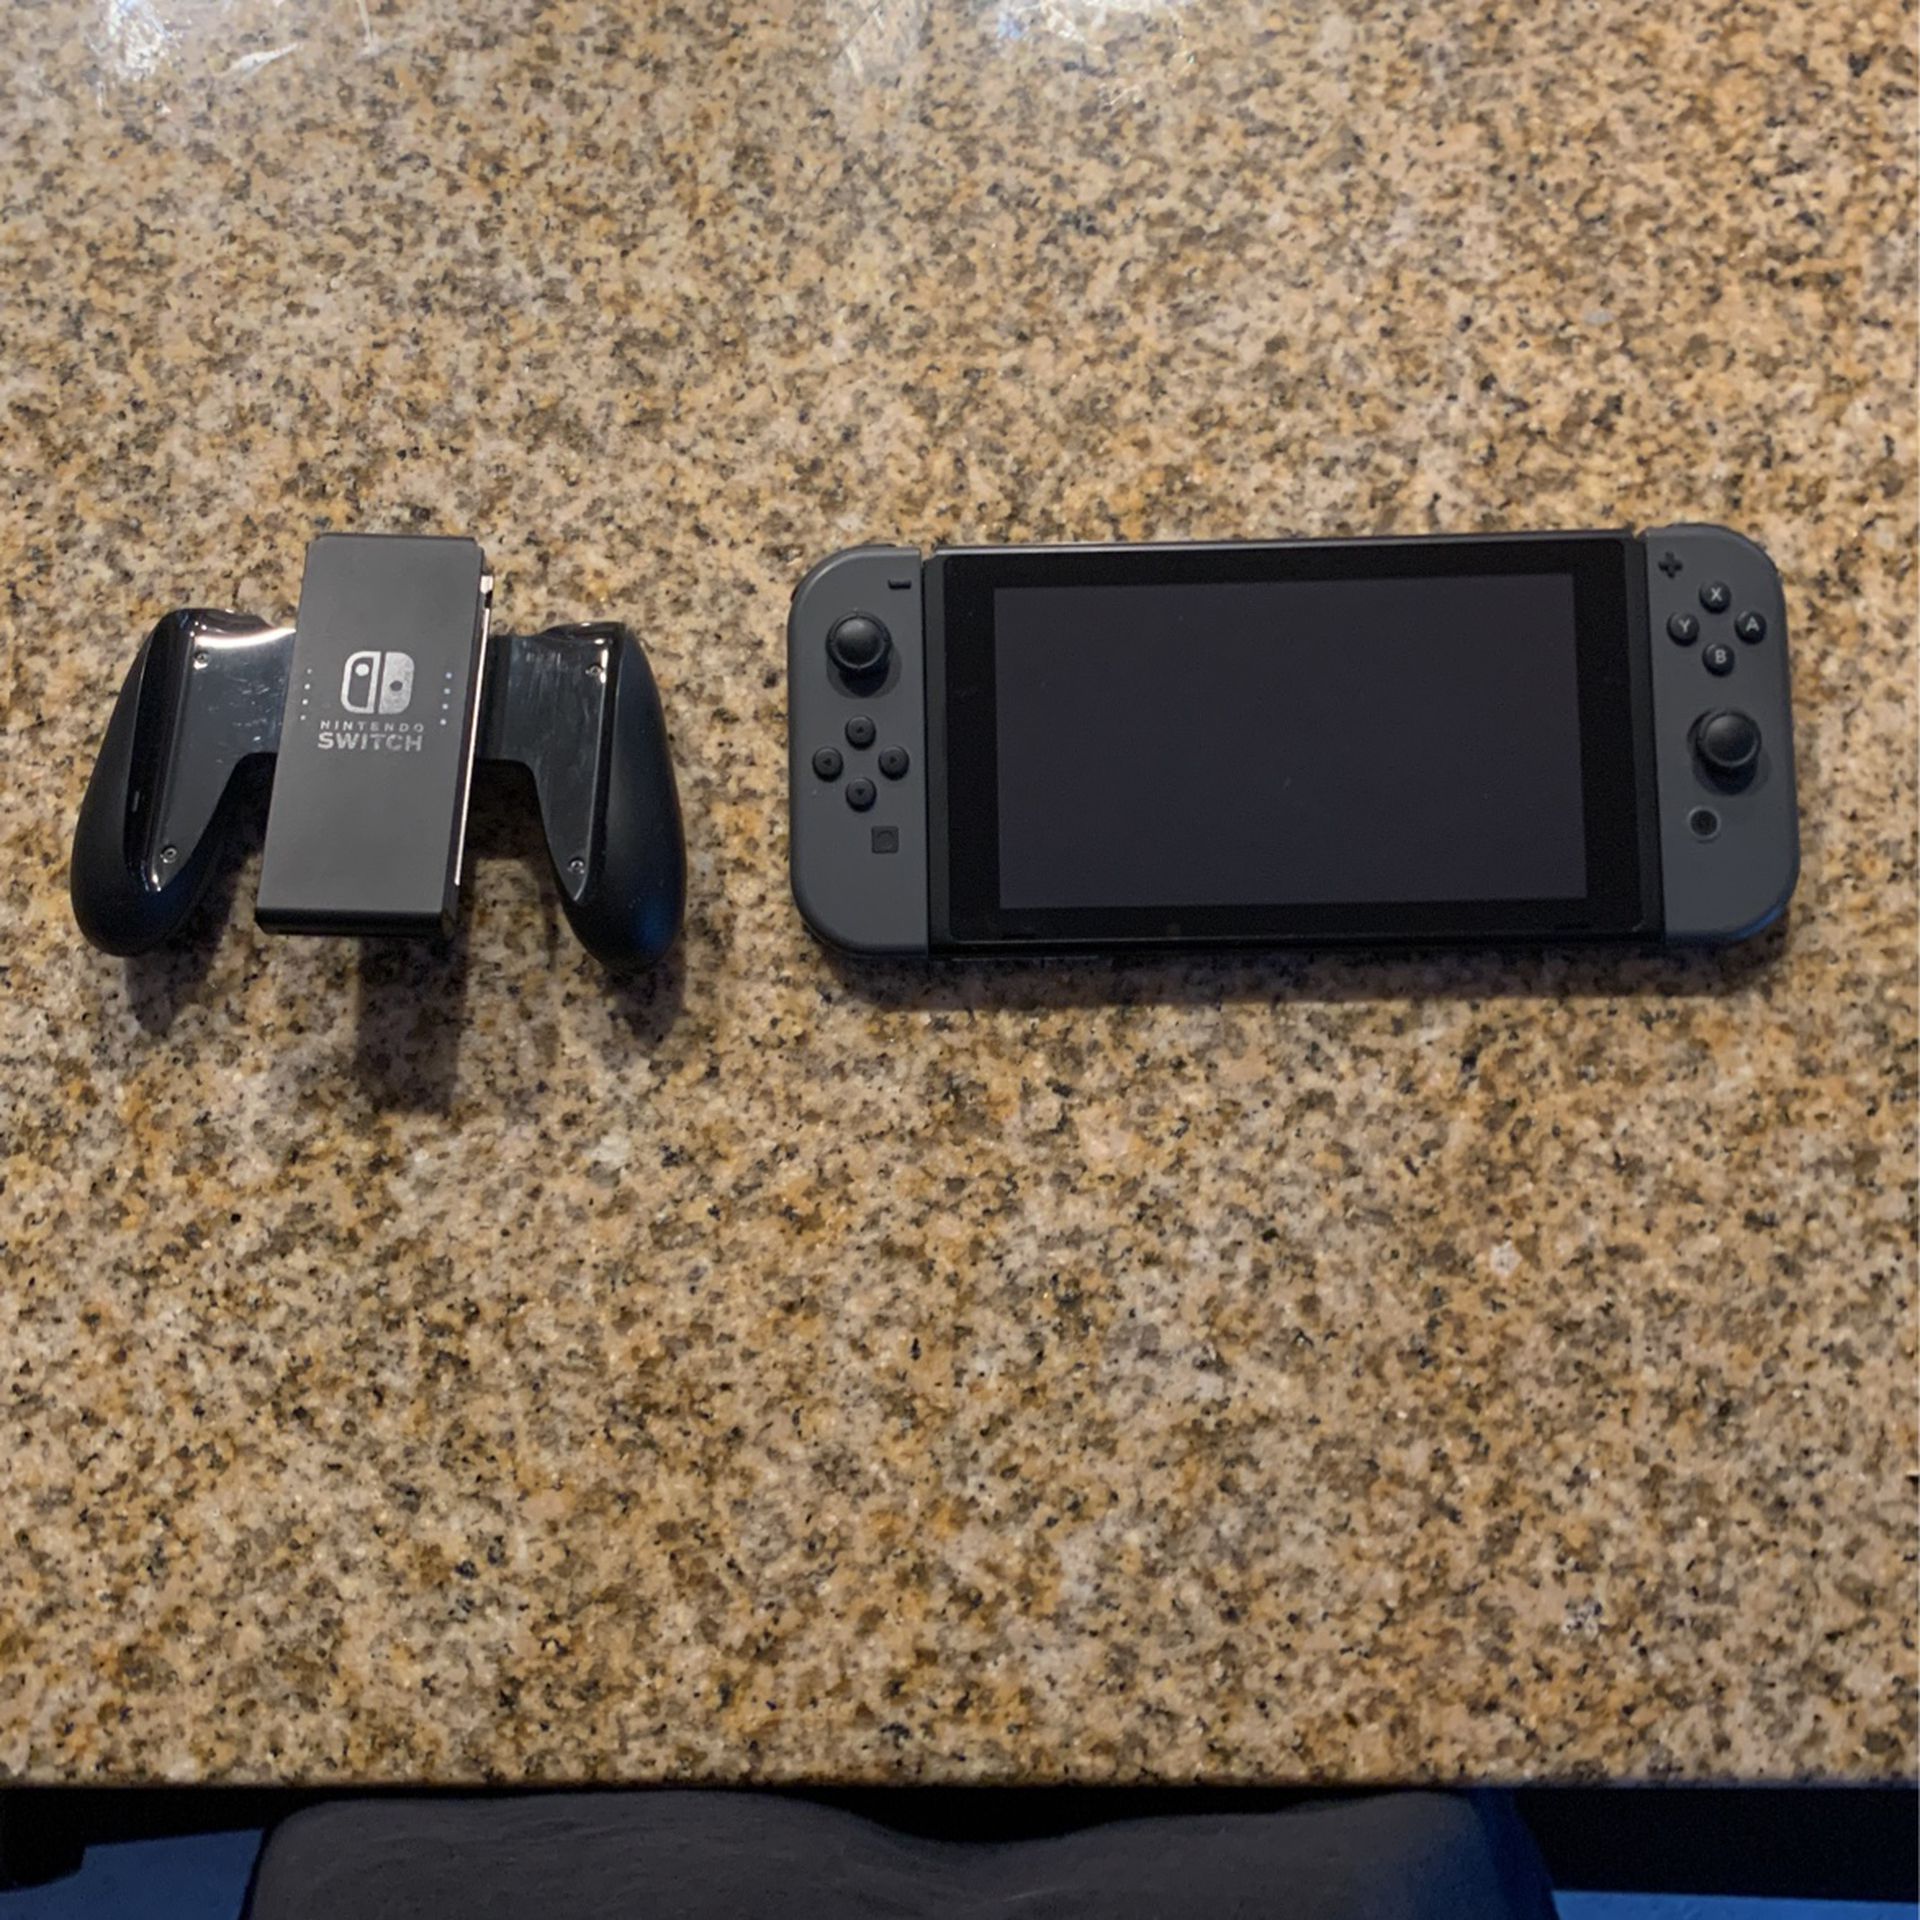 Nintendo Switch With Controller.